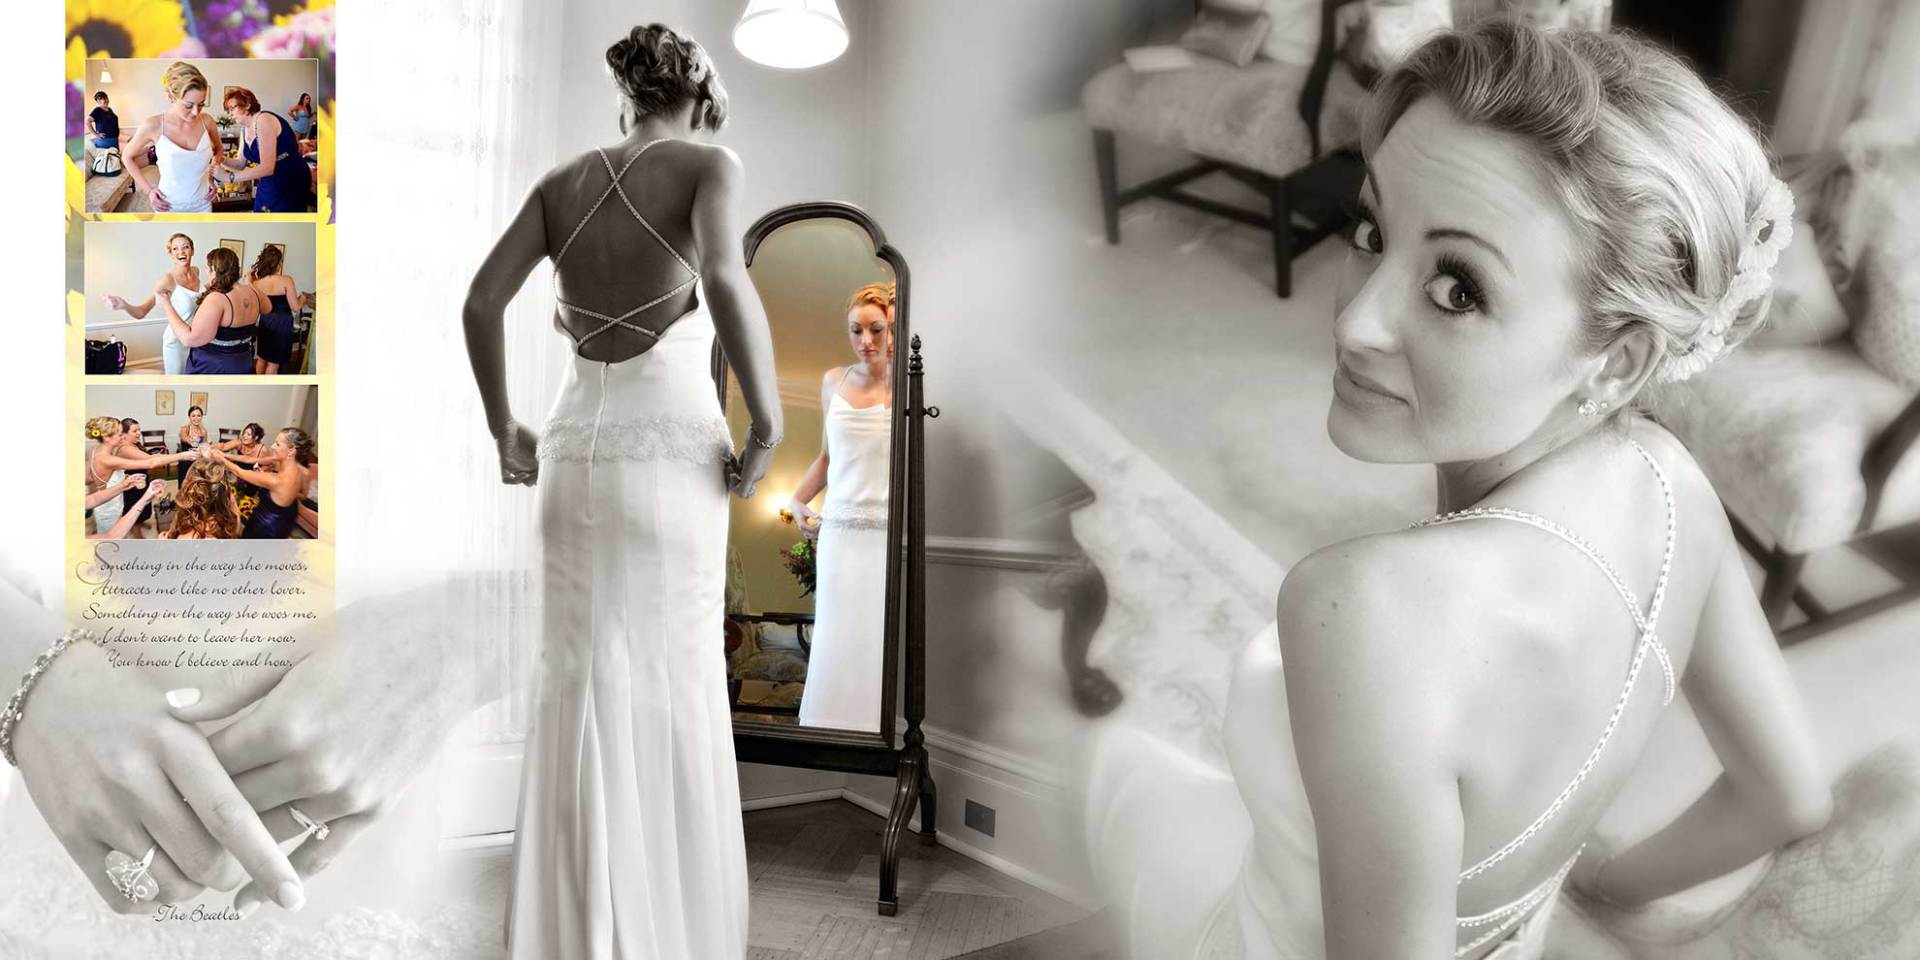 a woman in a wedding dress is standing in front of a mirror in an wedding album page